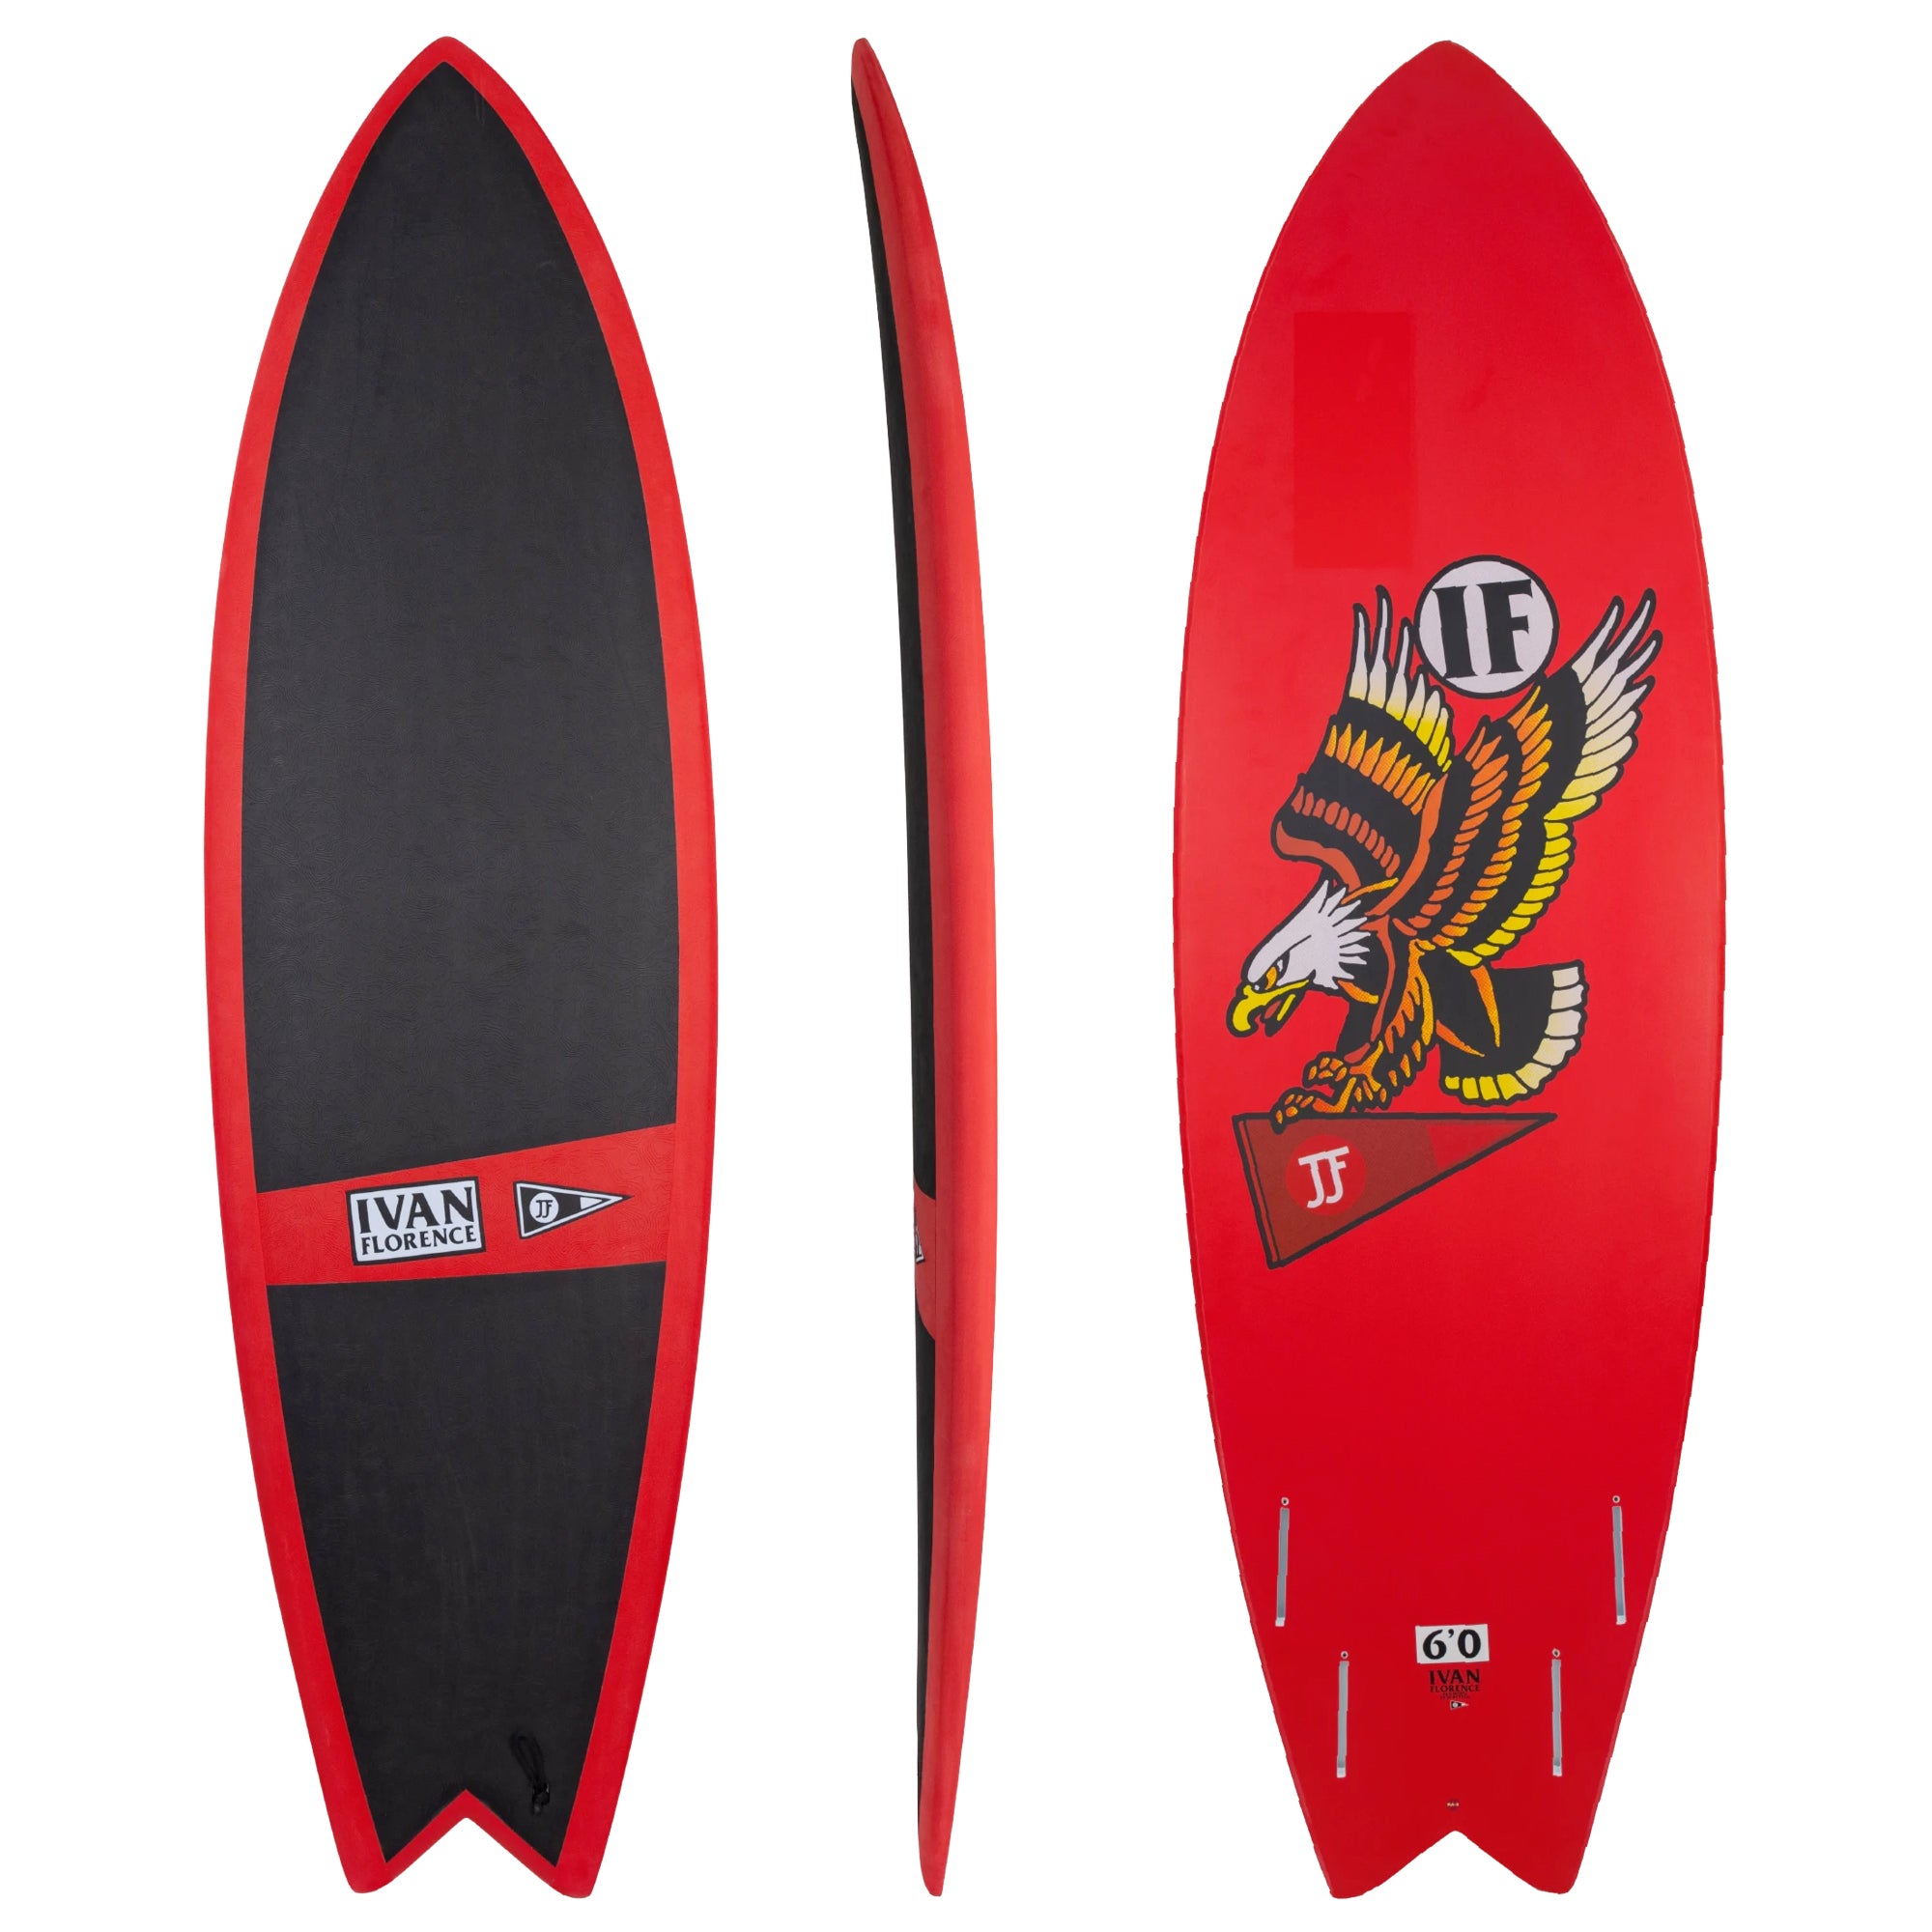 JJF by Pyzel Ivan Florence Pro Fish Soft Surfboard